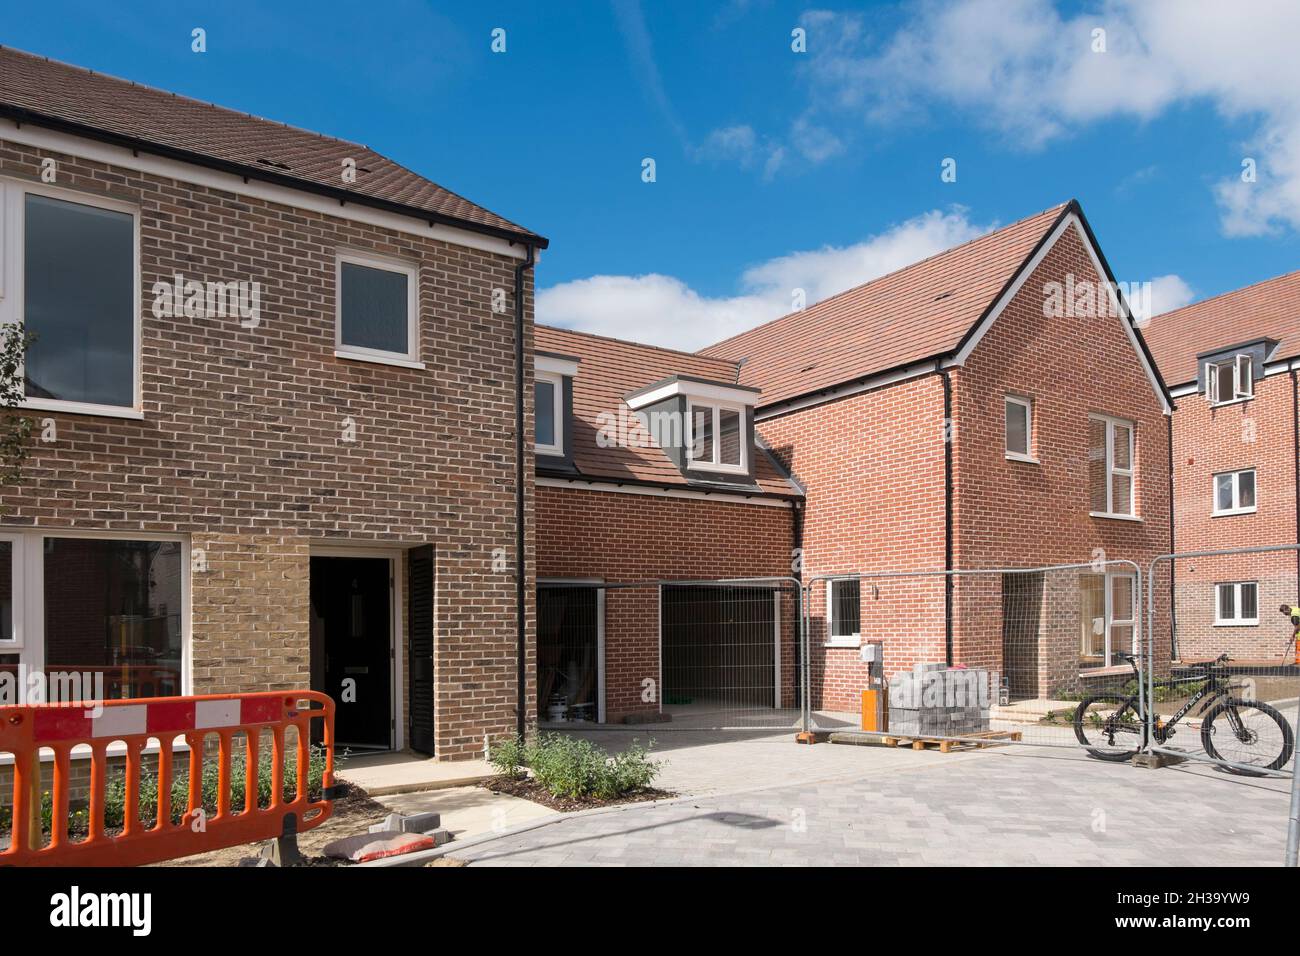 New houses with garages in Joseph Lancaster Lane, the new development in north Chichester, West Sussex, England, UK. Stock Photo